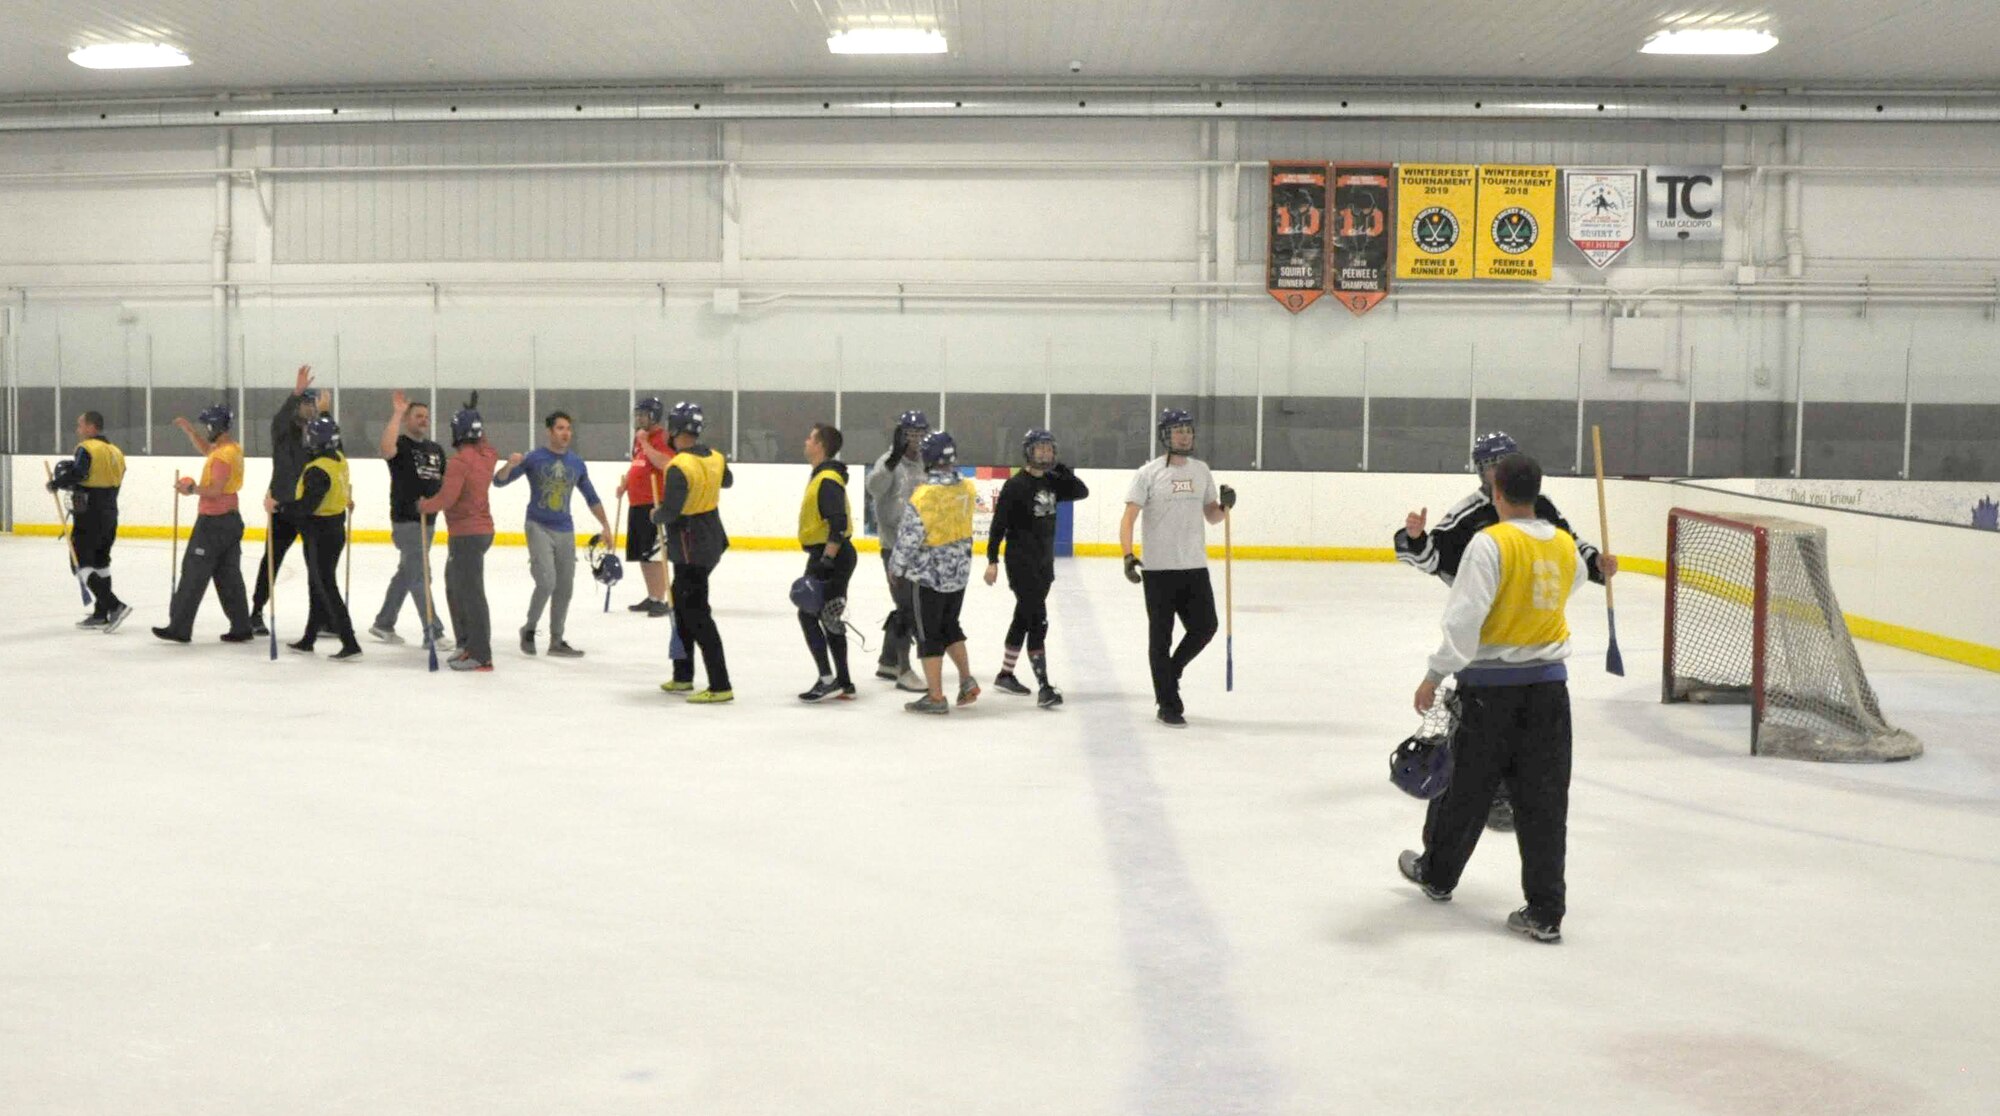 Members of the 38th Reconnaissance Squadron congratulate each other by high-fiving after a game of Broomball June 21, 2019, at Grover Ice Rink, Omaha, Nebraska. The squadron participated in this unit cohesion event funded by the Unite Program. The program is the vision of Gen. David L. Goldfein, Air Force chief of staff, who recognized the need to take care of our squadrons by allowing units to focus on resiliency and cohesion for its members.